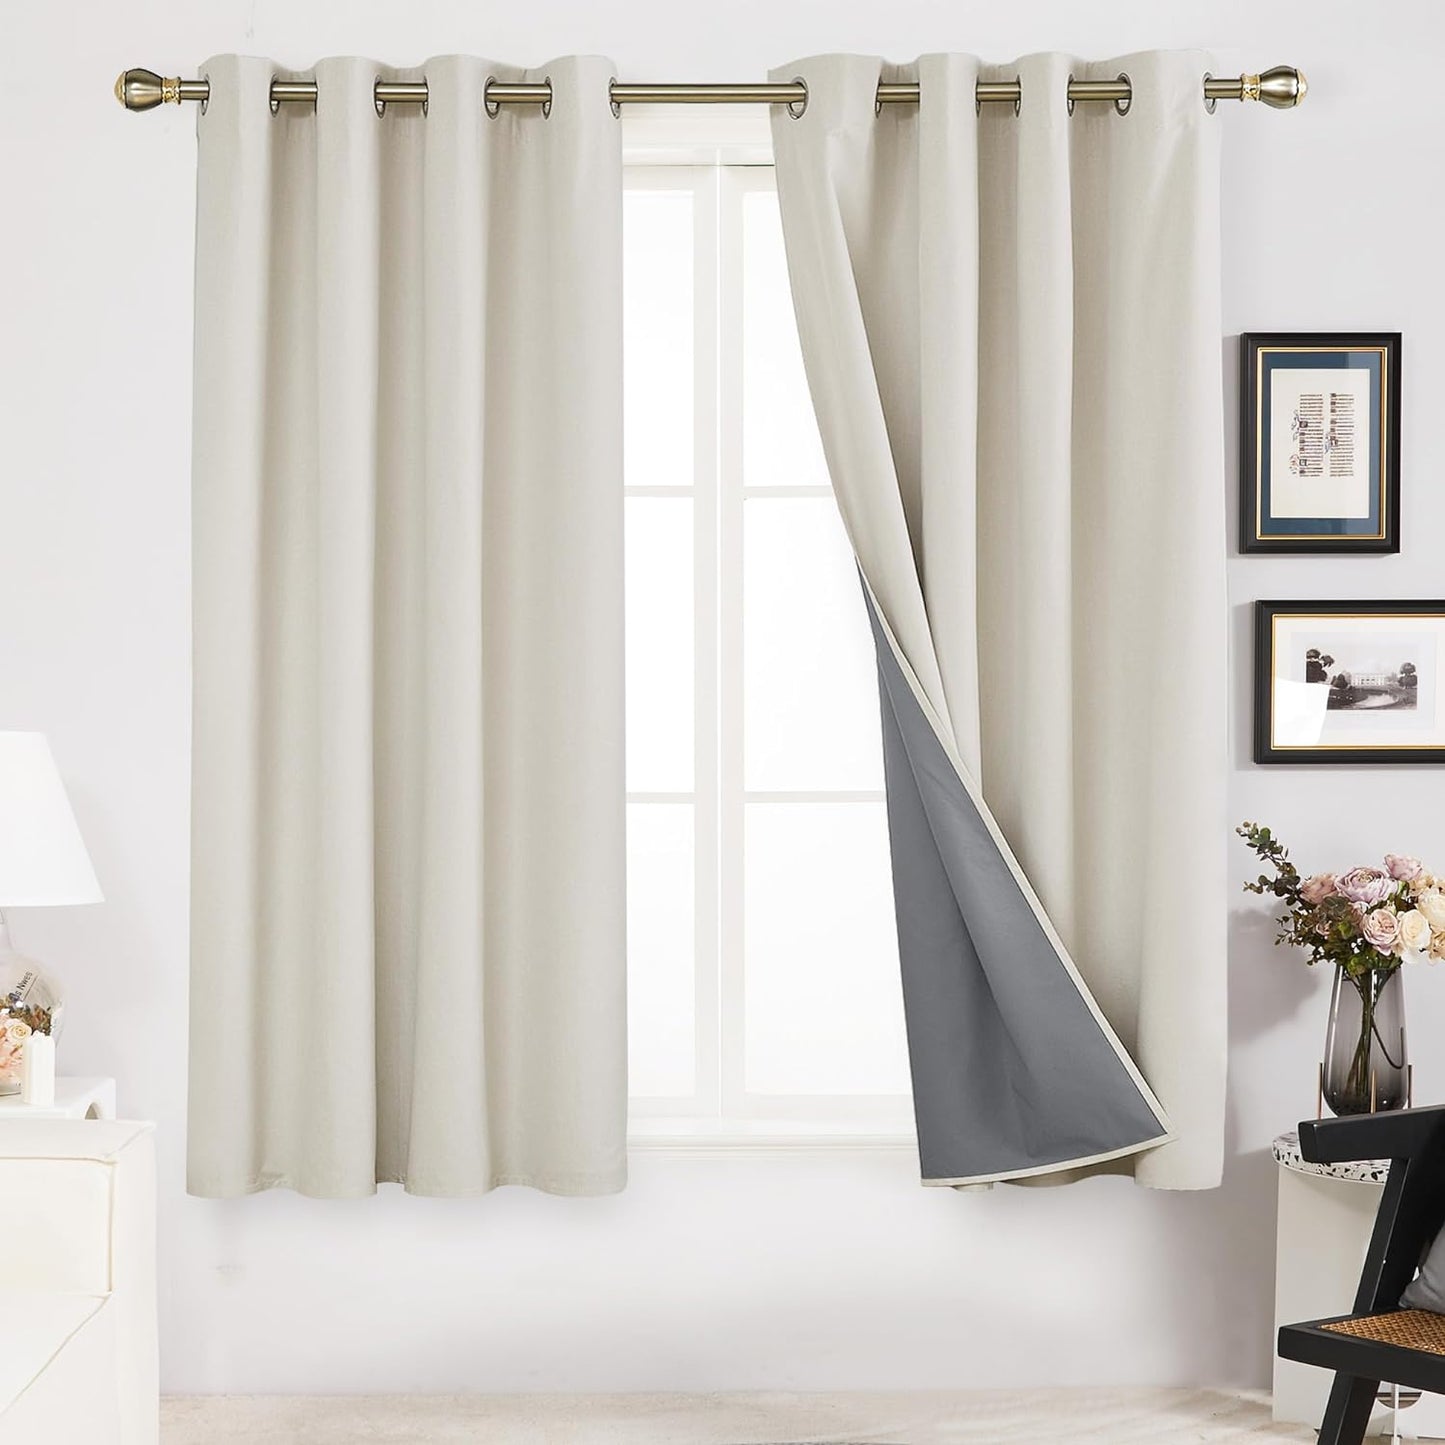 Deconovo Linen Blackout Curtains 84 Inch Length Set of 2, Thermal Curtain Drapes with Grey Coating, Total Light Blocking Waterproof Curtains for Indoor/Outdoor (Light Grey, 52W X 84L Inch)  Deconovo Cream 52X45 Inches 